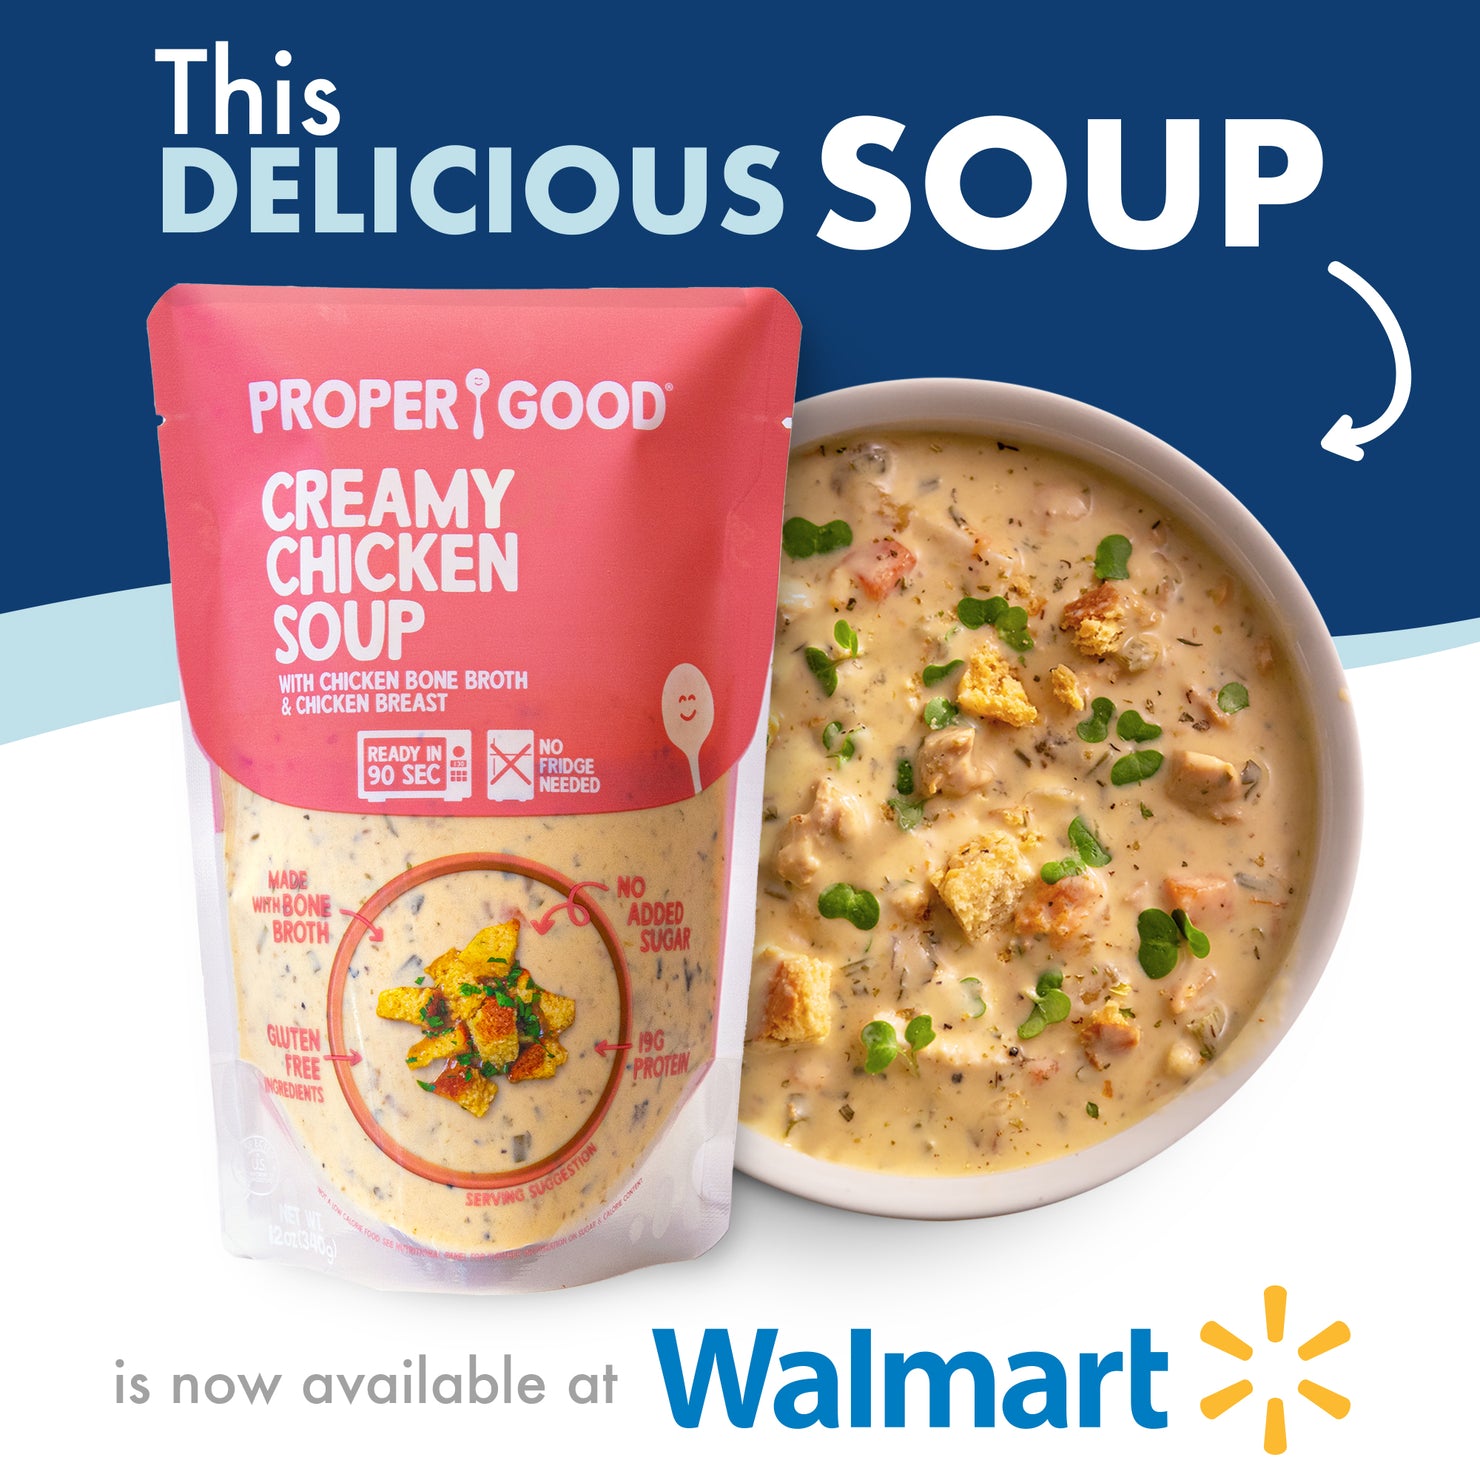 Creamy Chicken Soup Now Available at Walmart - Eat Proper Good